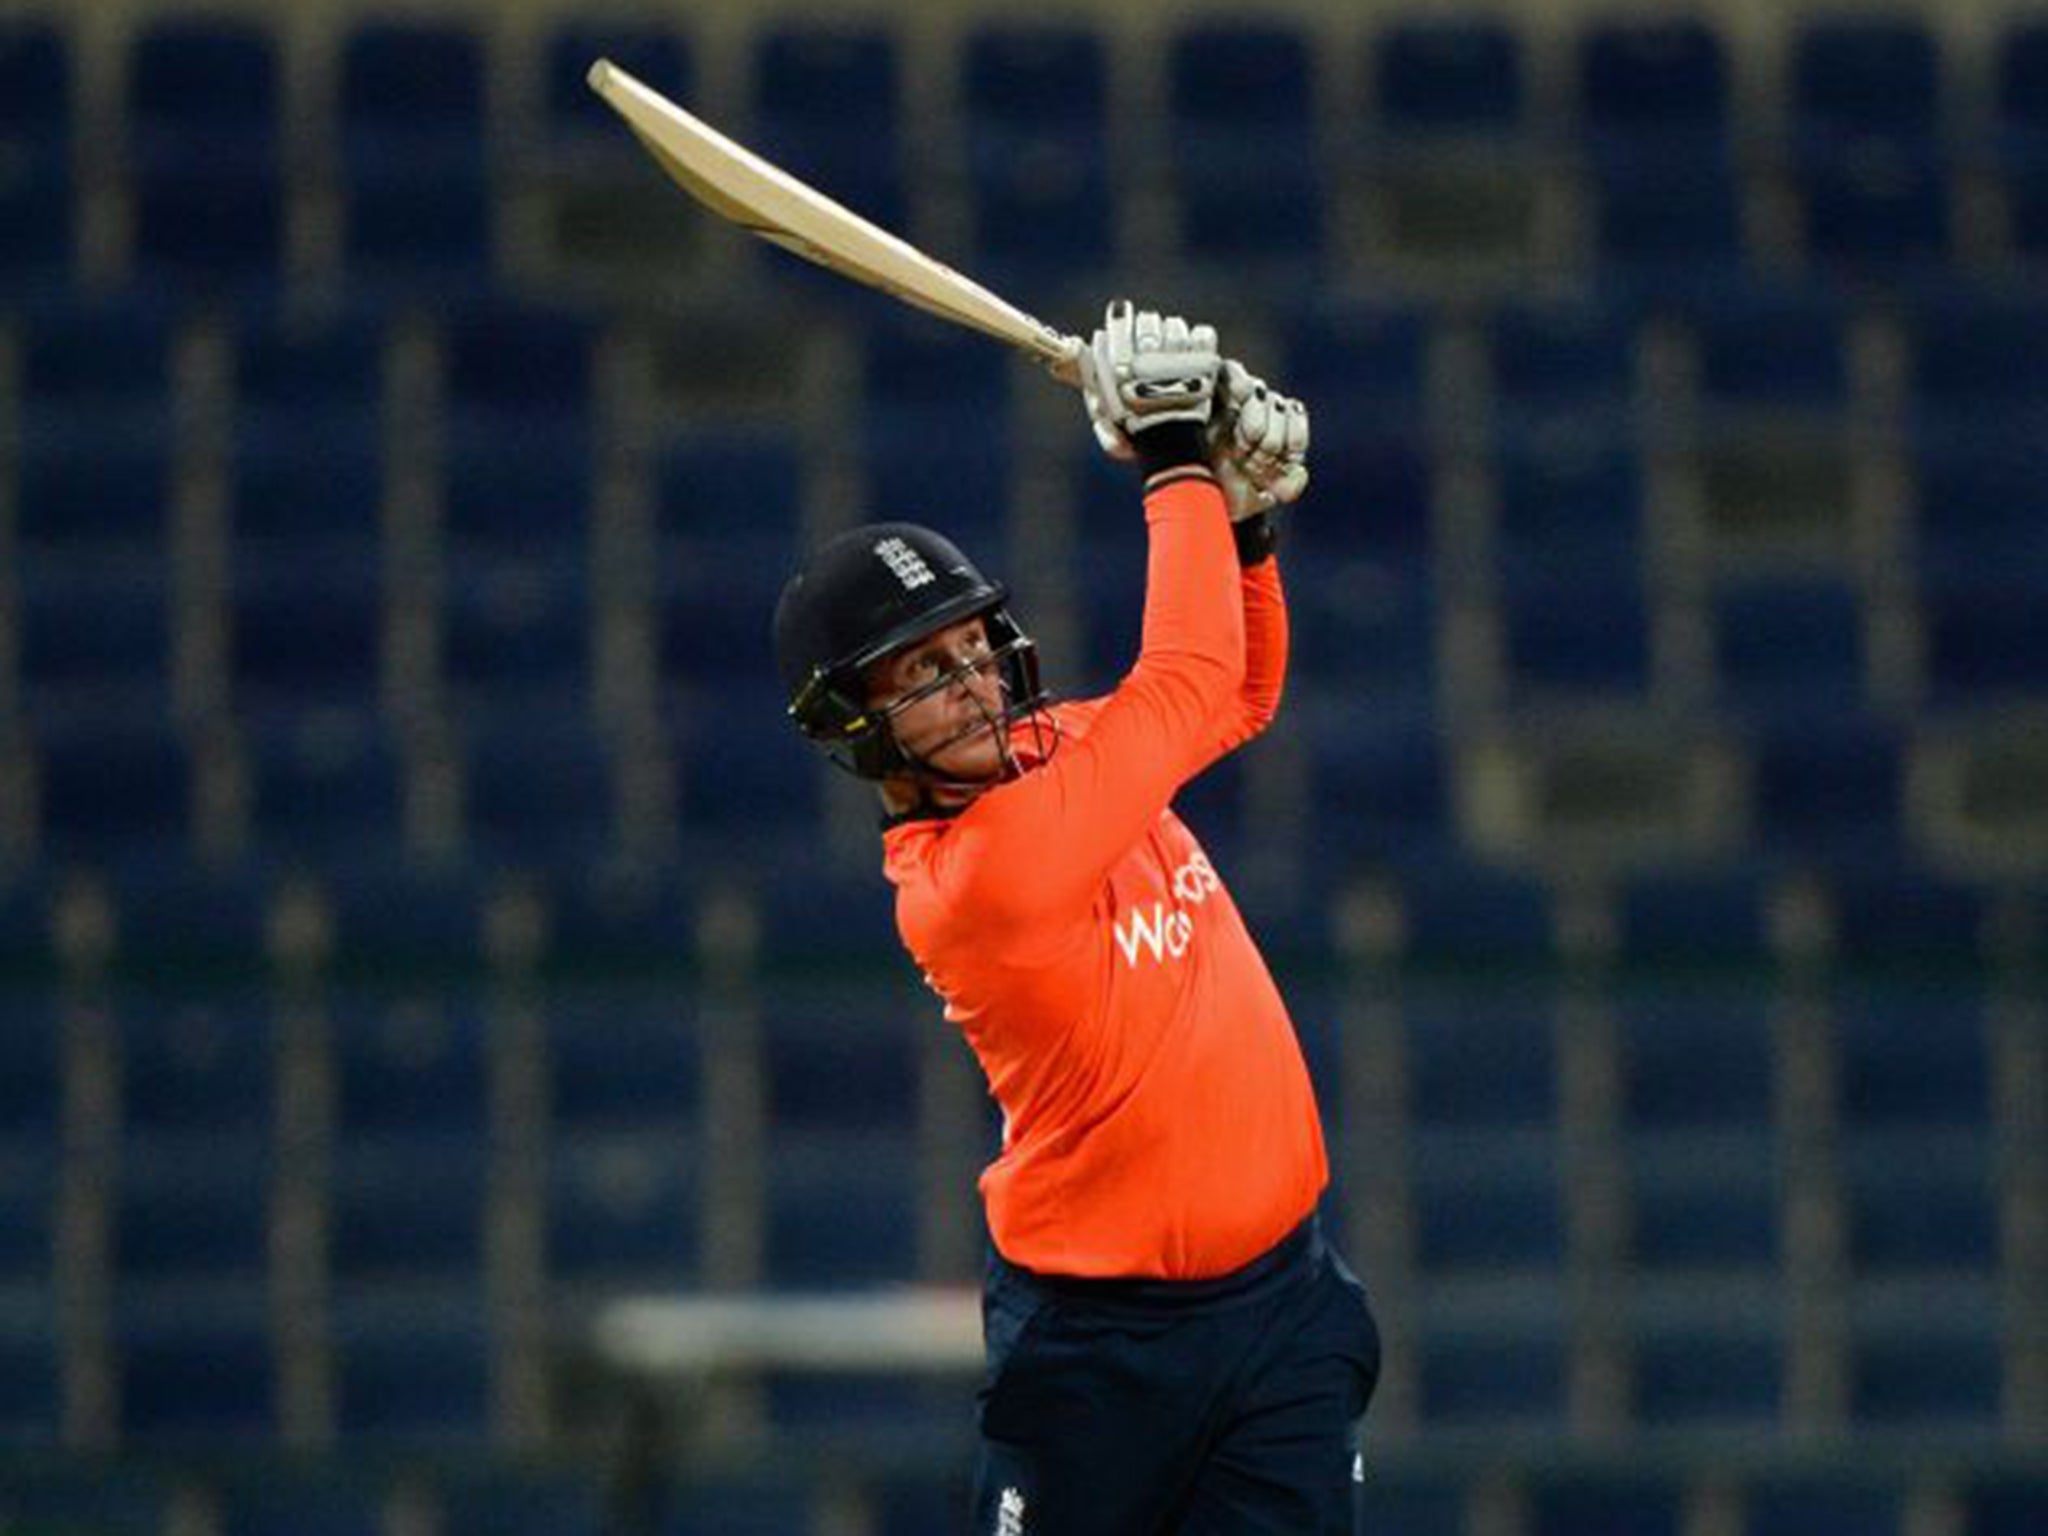 Jason Roy has picked up a life-changing deal in the Indian Premier League